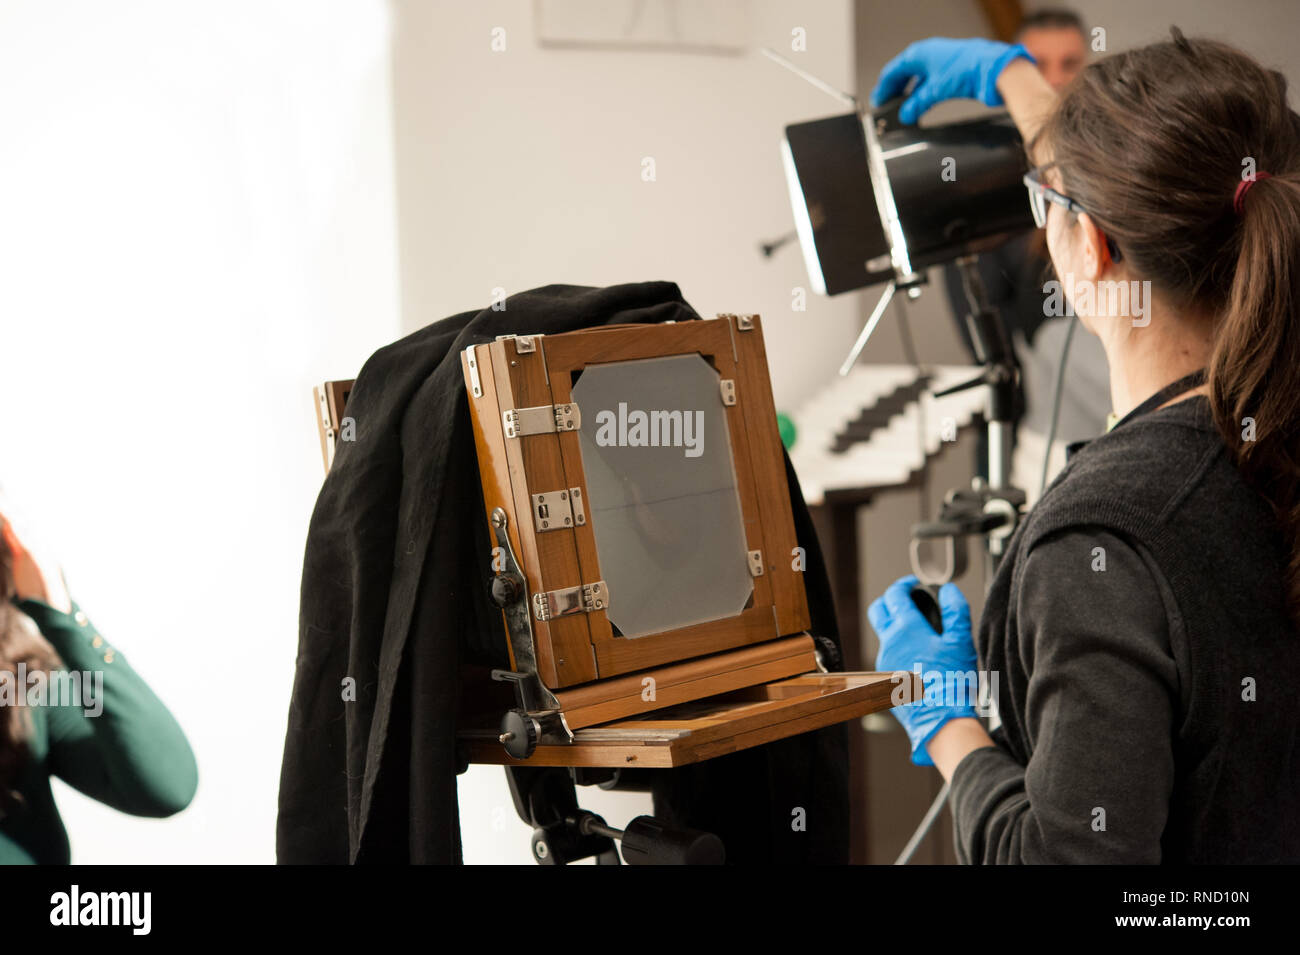 Photographer woman sets the ligths for portrait studio shooting. Large format camera in the foreground. Stock Photo